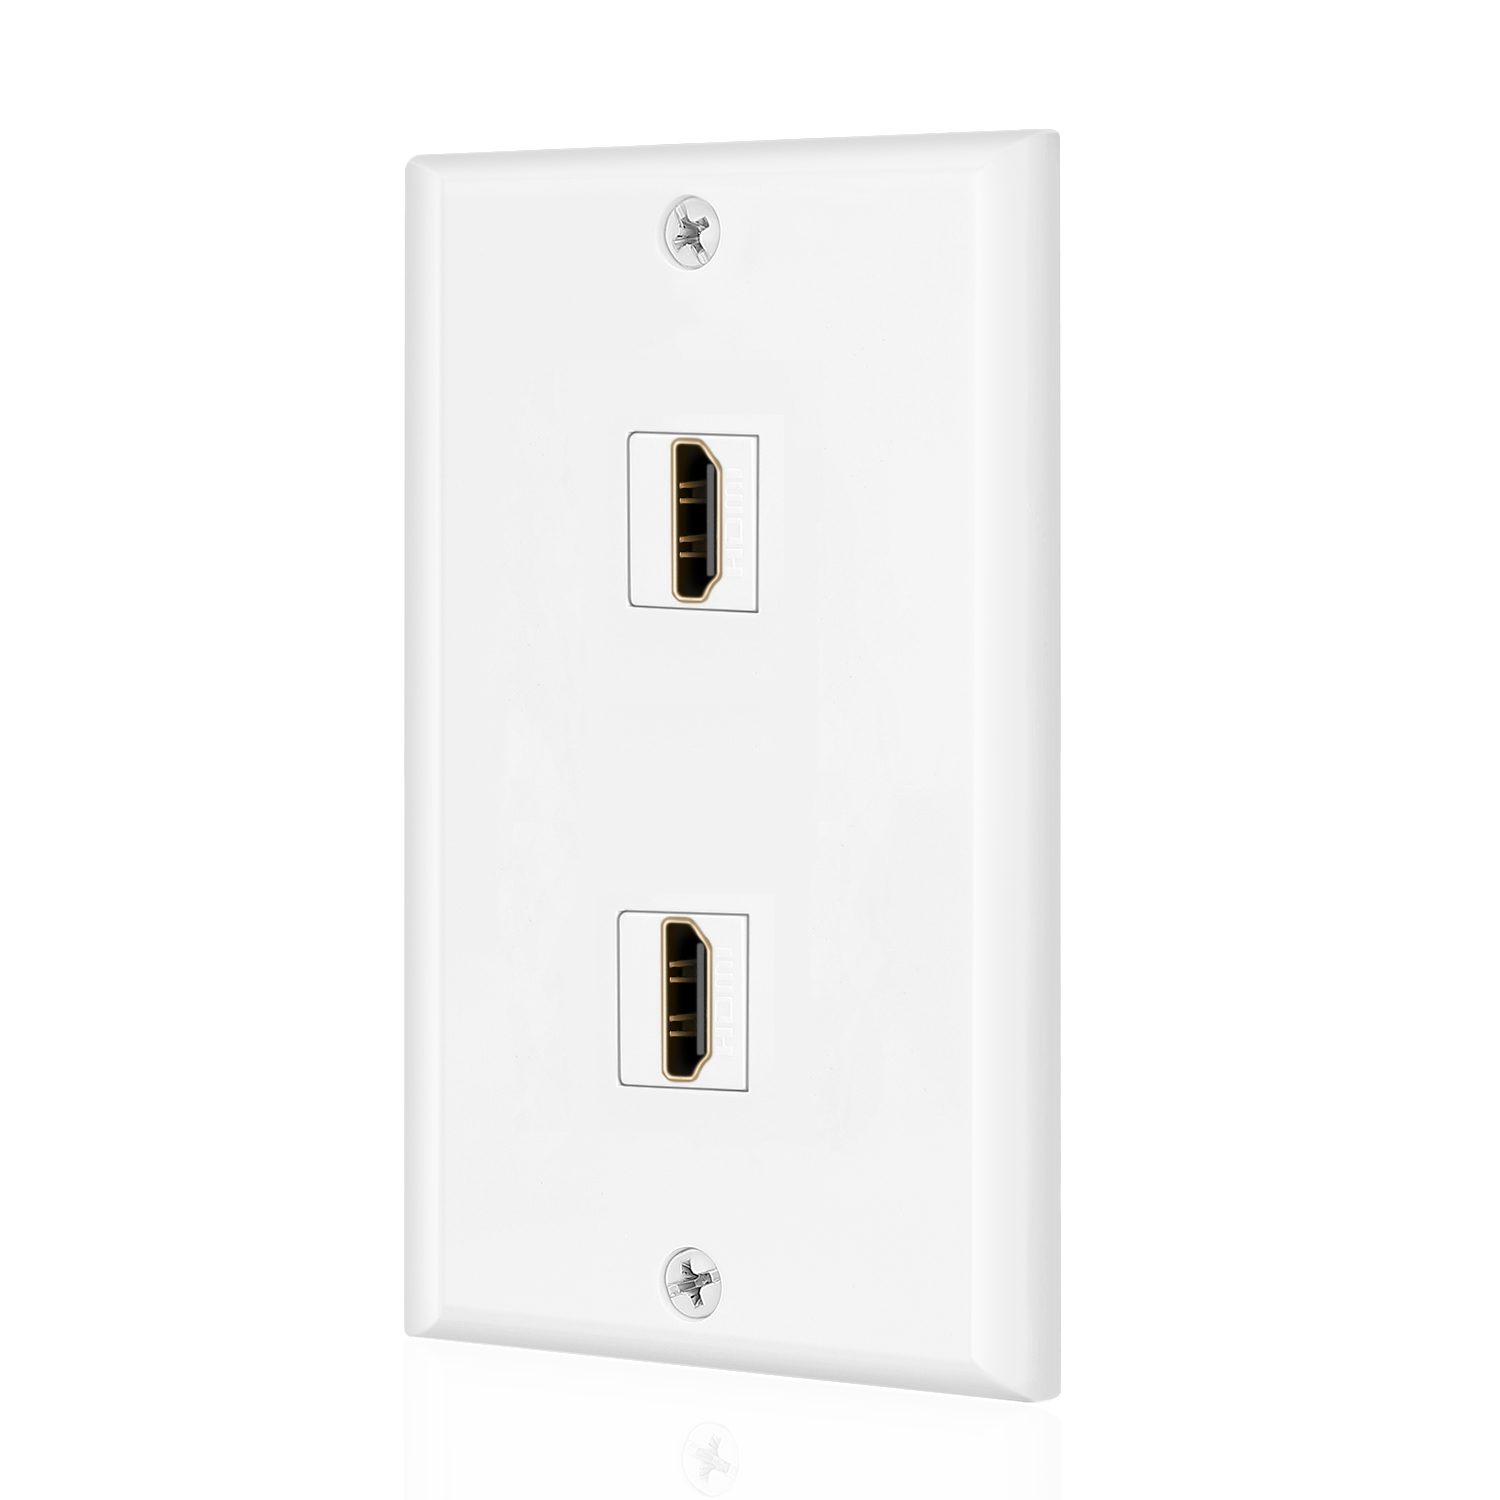 Secure HDMI Coupler - With a female port on the wall plate front and an HDMI female port on the back, easily connects to an HDMI cable run in the wall; Mount near your AV receiver or home theater system with an existing low voltage wall plate location or new HDMI outlet wall plate location